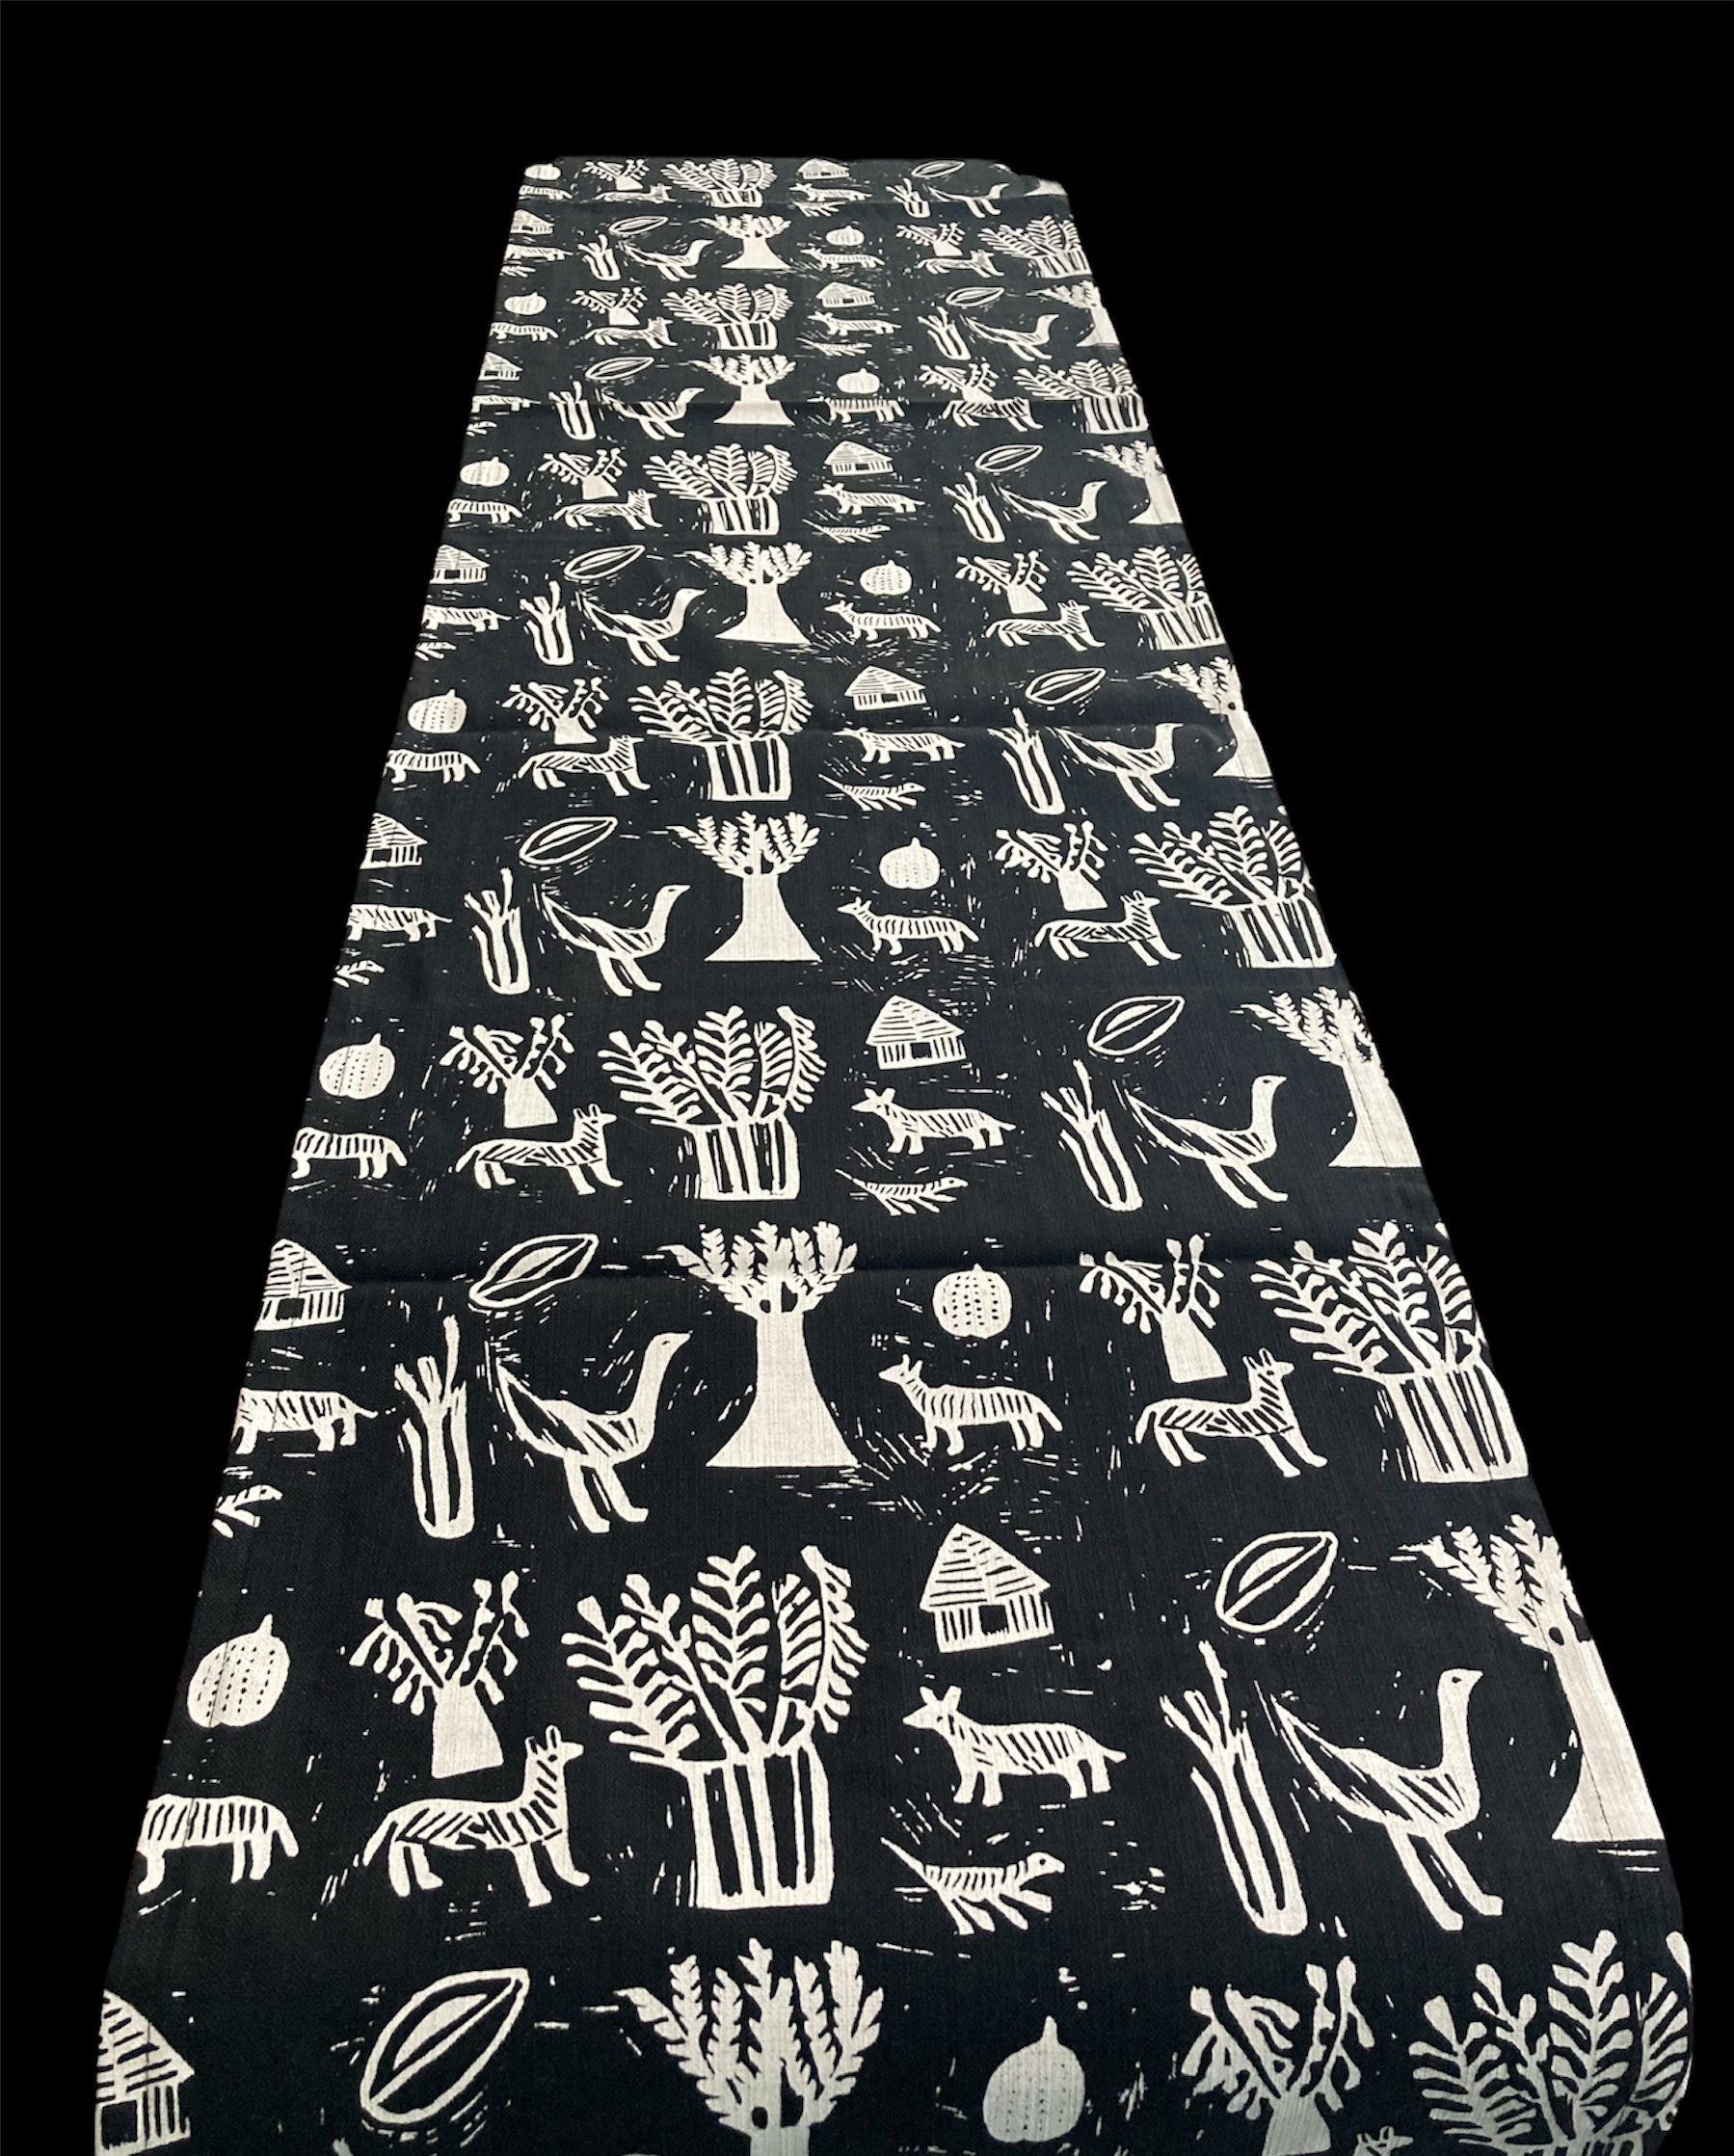 100% cotton Table Runner 96\" x 16\" from Namibia - Design wb05l